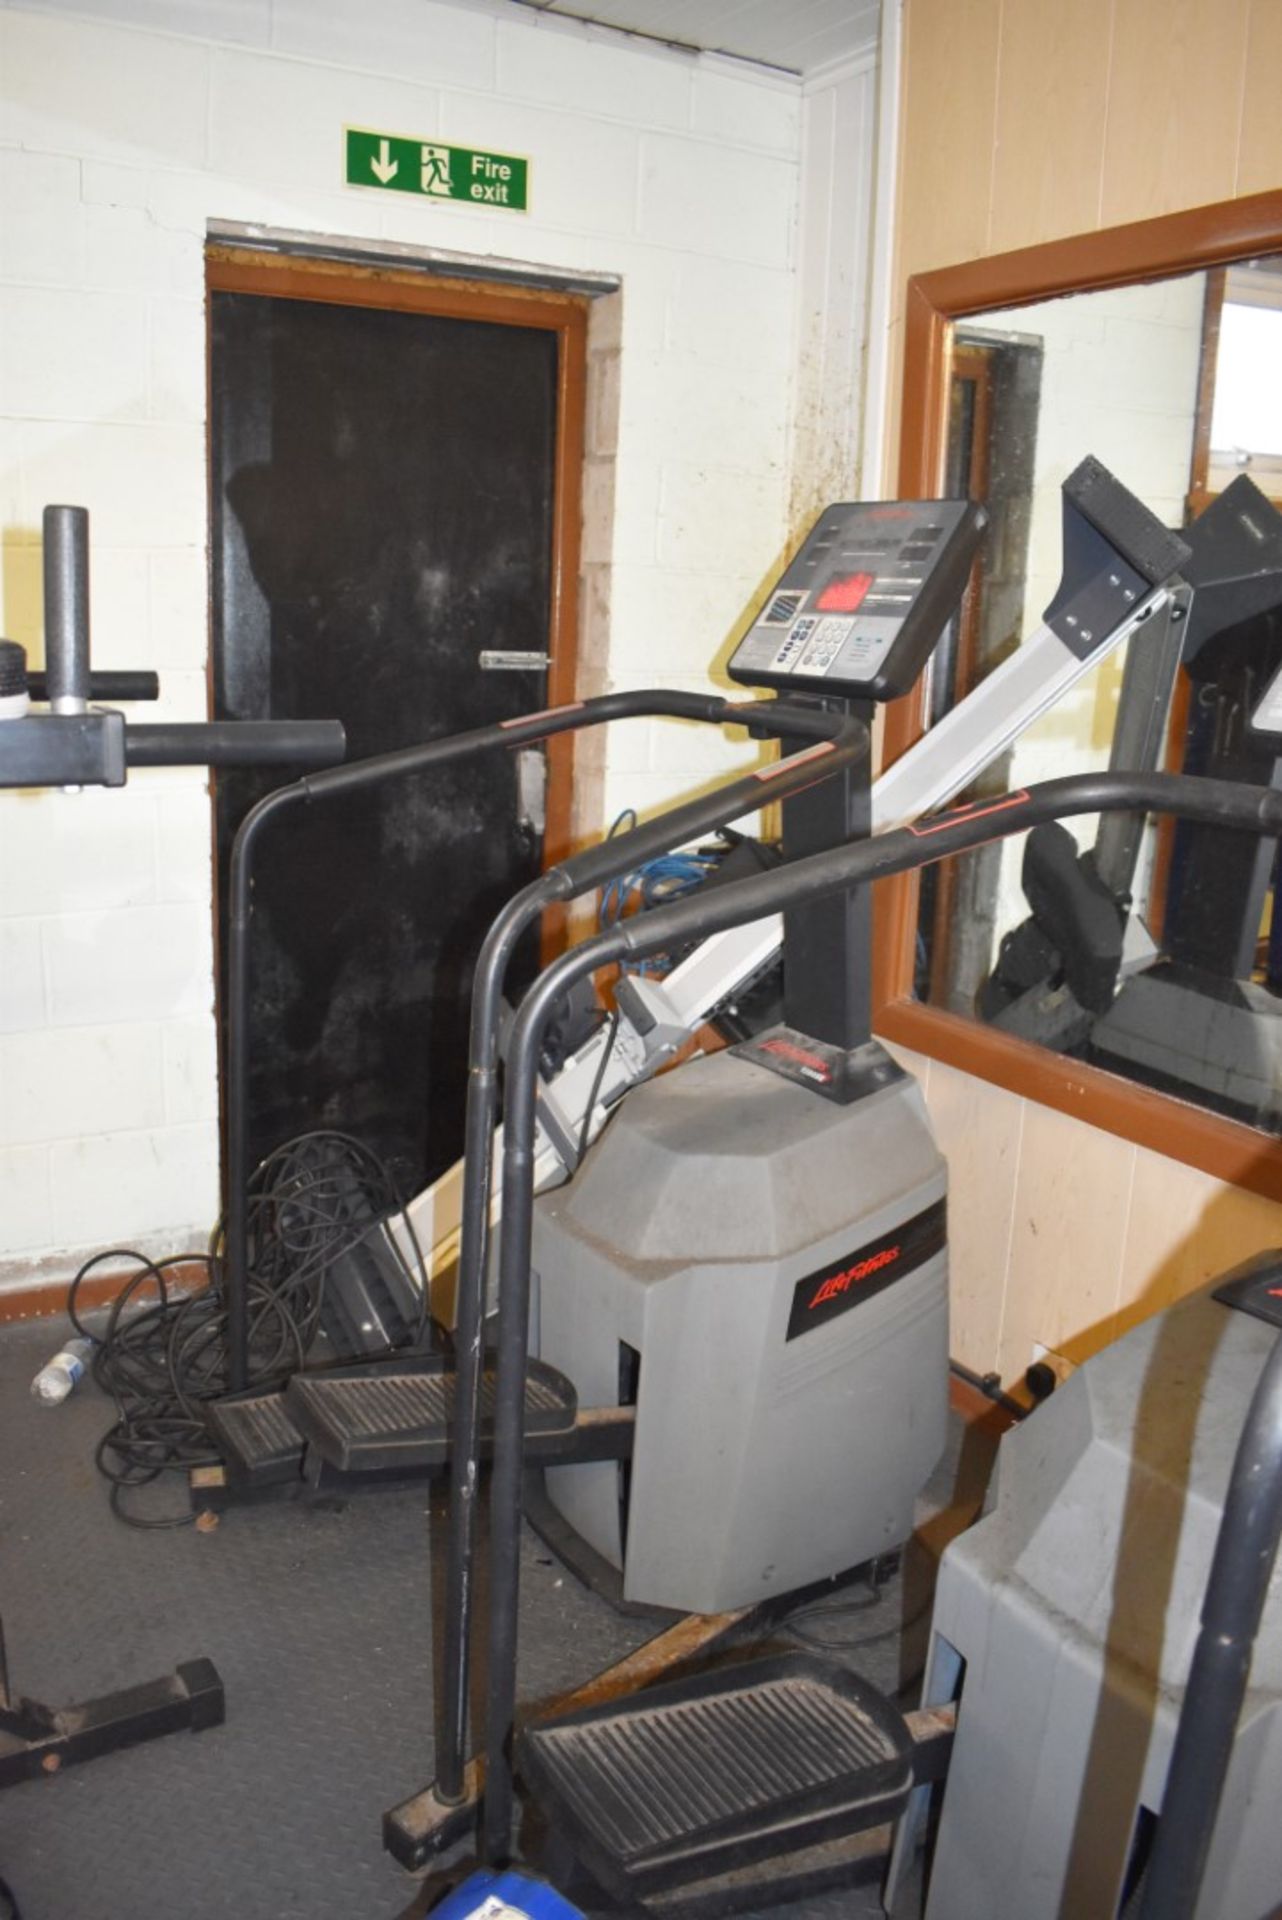 Contents of Bodybuilding and Strongman Gym - Includes Approx 30 Pieces of Gym Equipment, Floor Mats, - Image 69 of 95